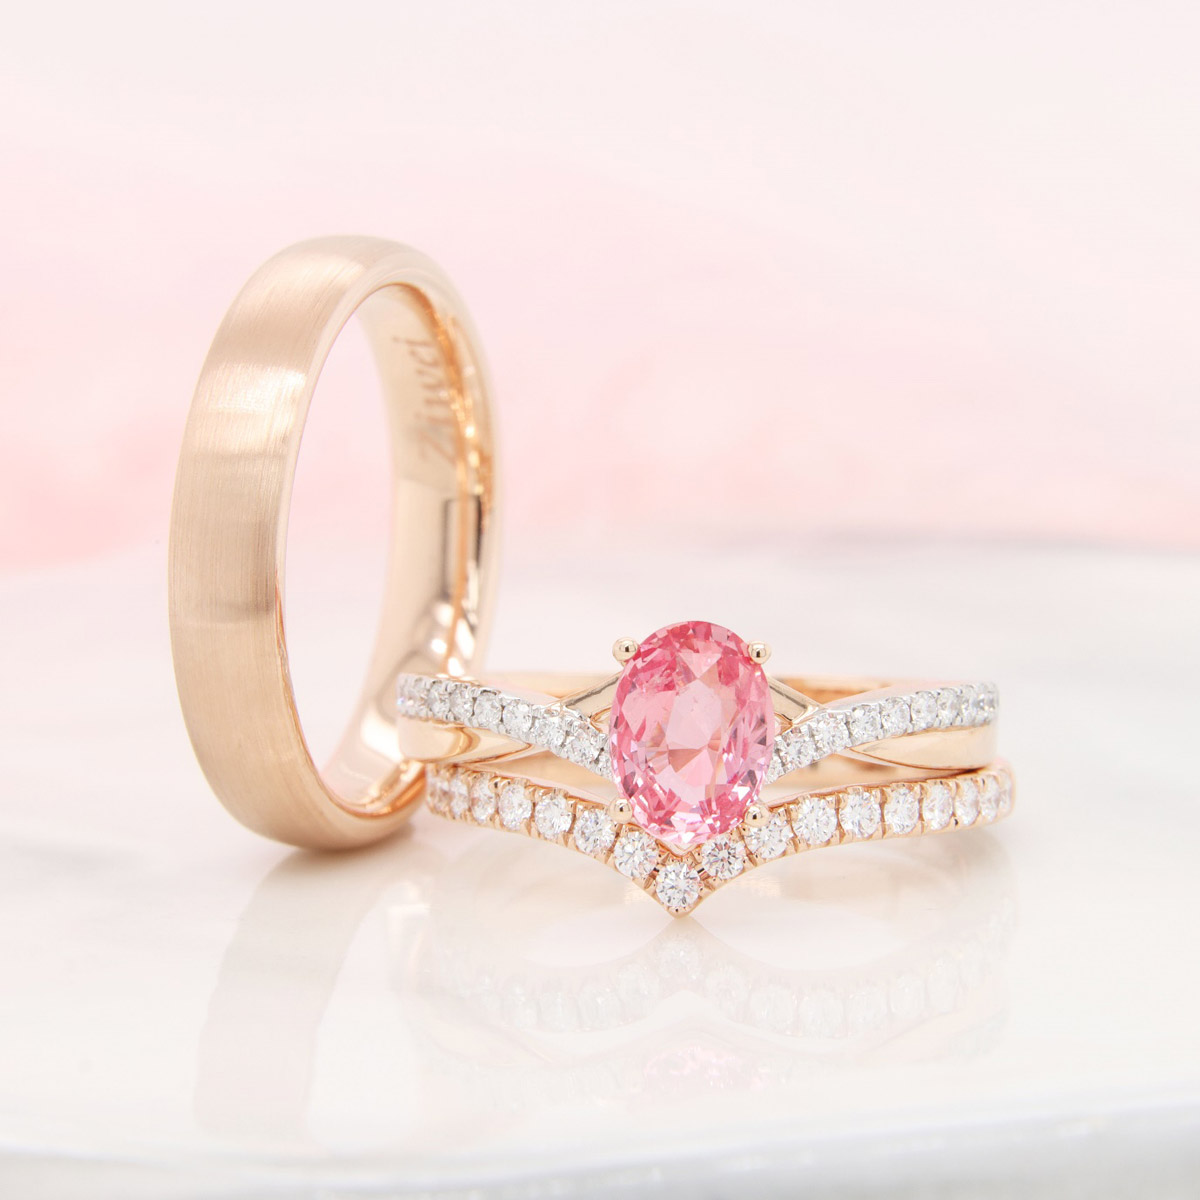 GIOIA Fine Jewellery: Create the Engagement Ring of Your Dreams Exactly How You Want It